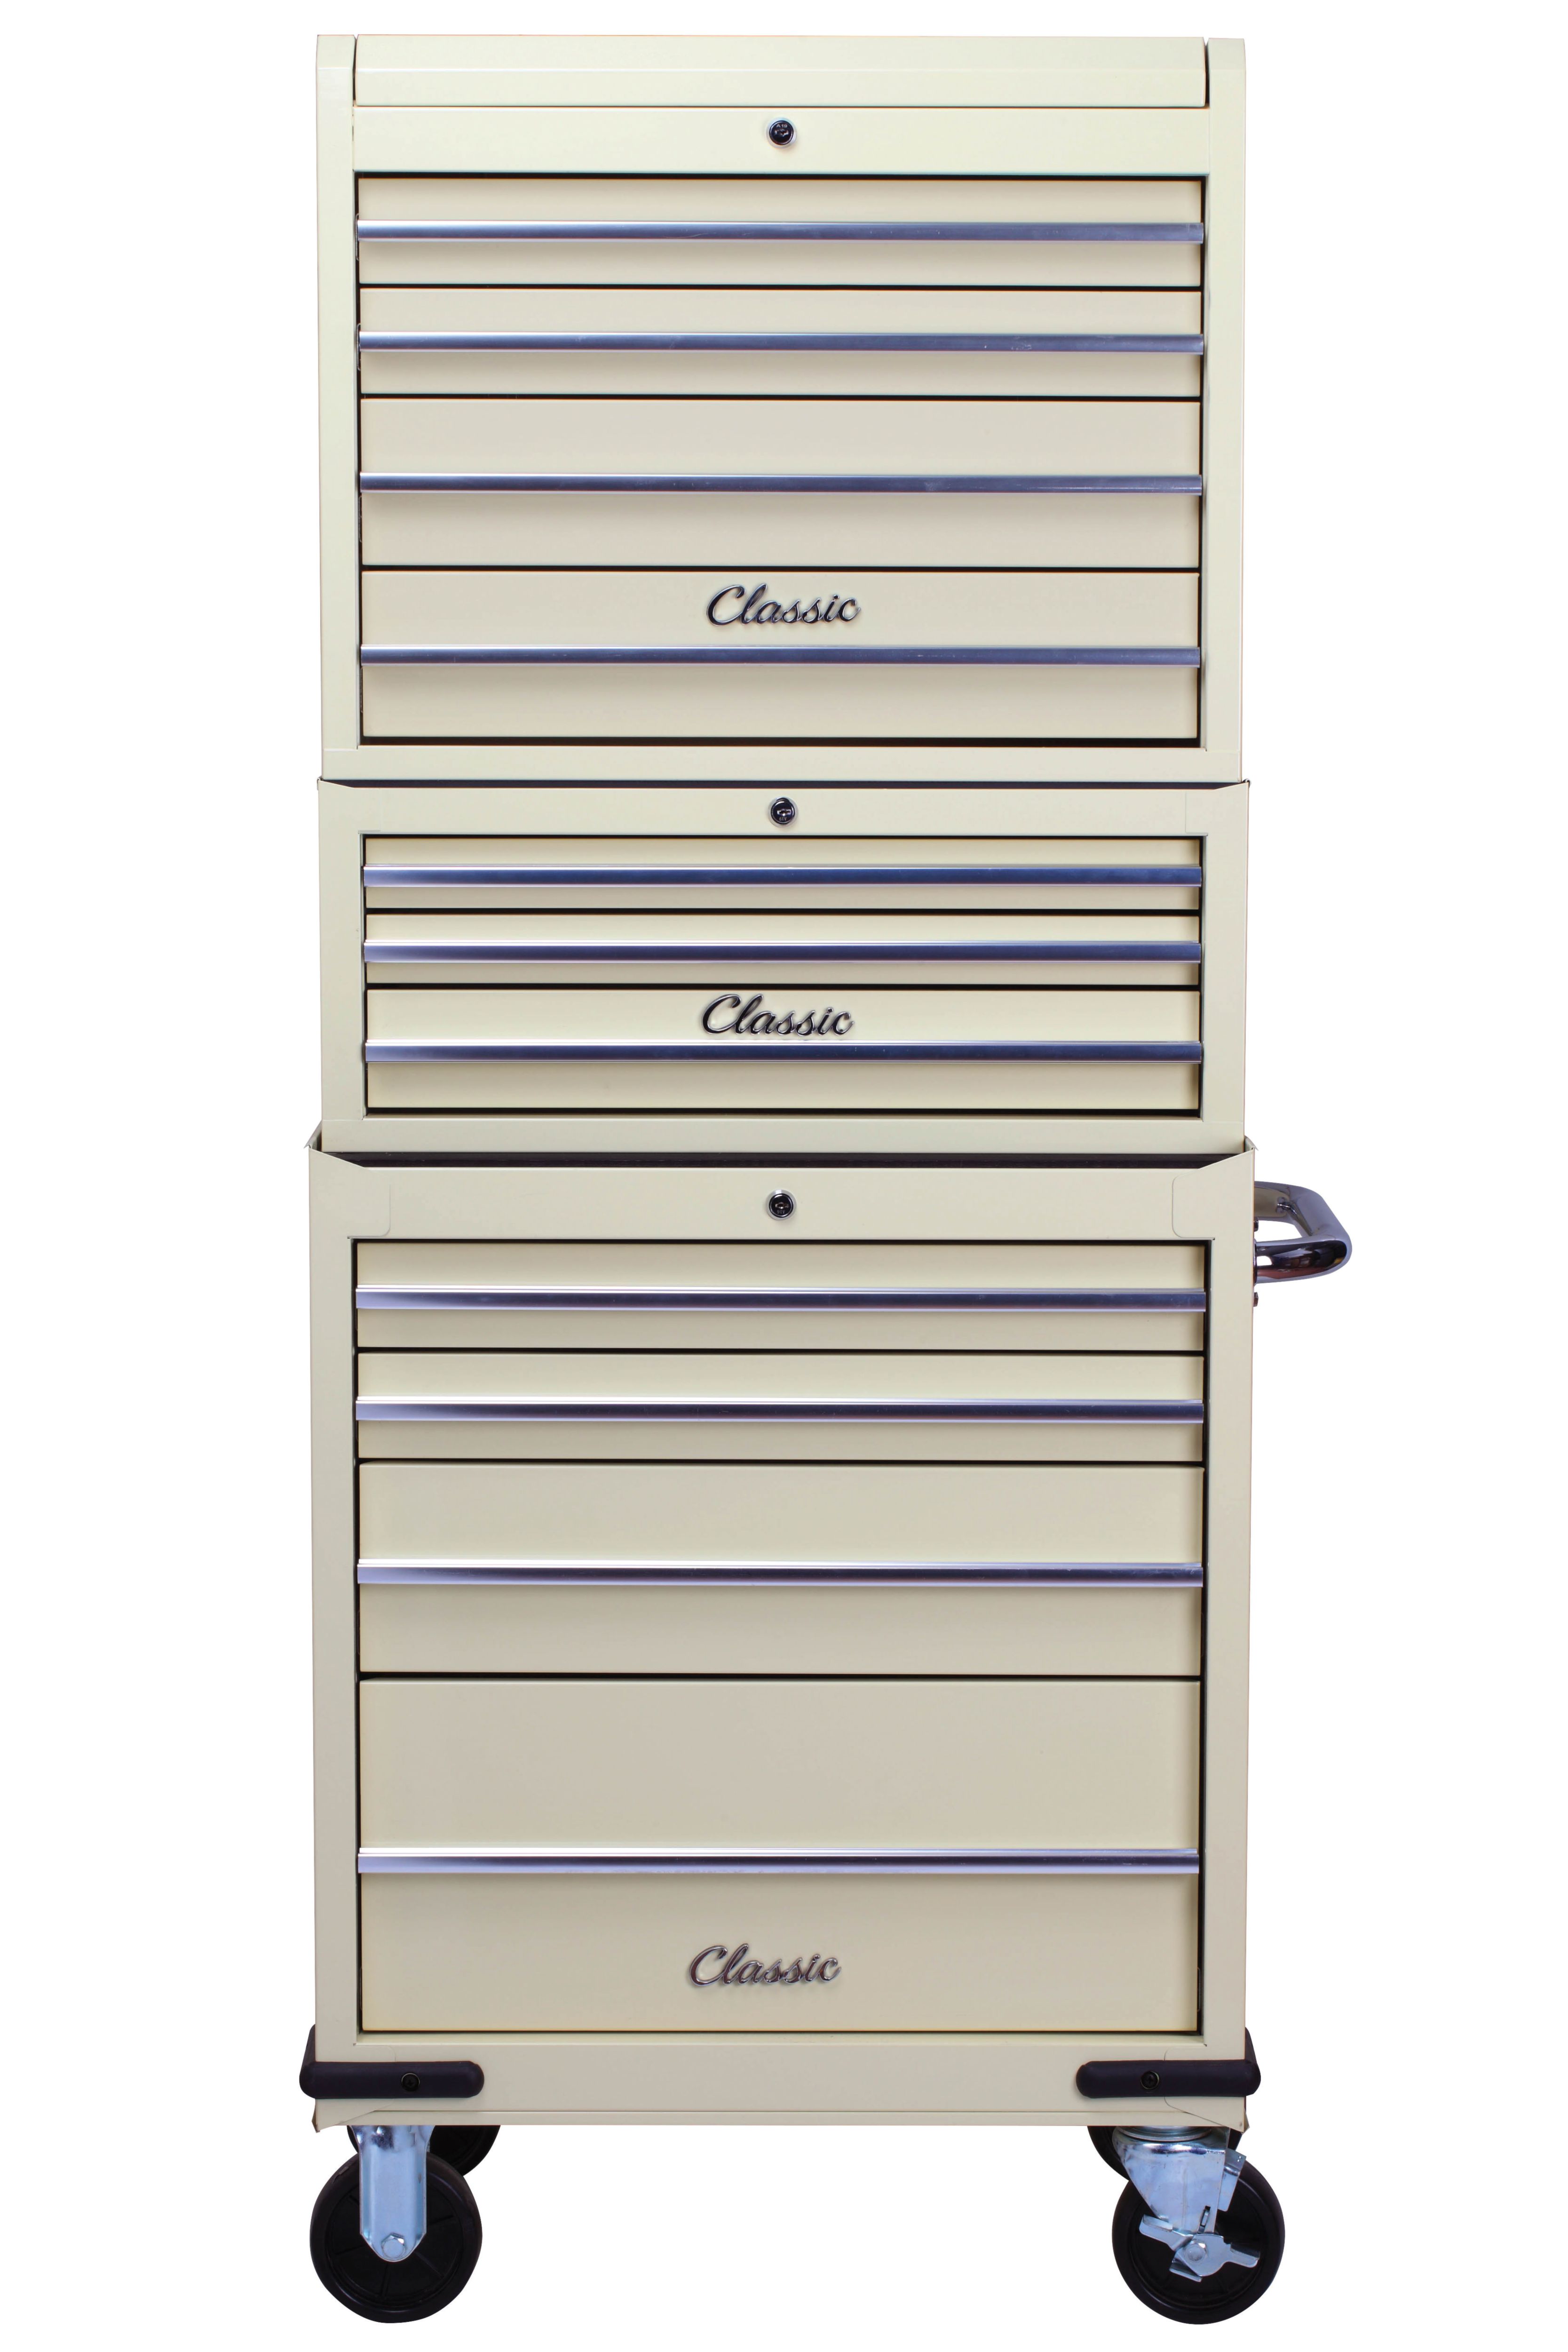 Image of Hilka Classic 11 Drawer Mobile Combination Unit - Cream